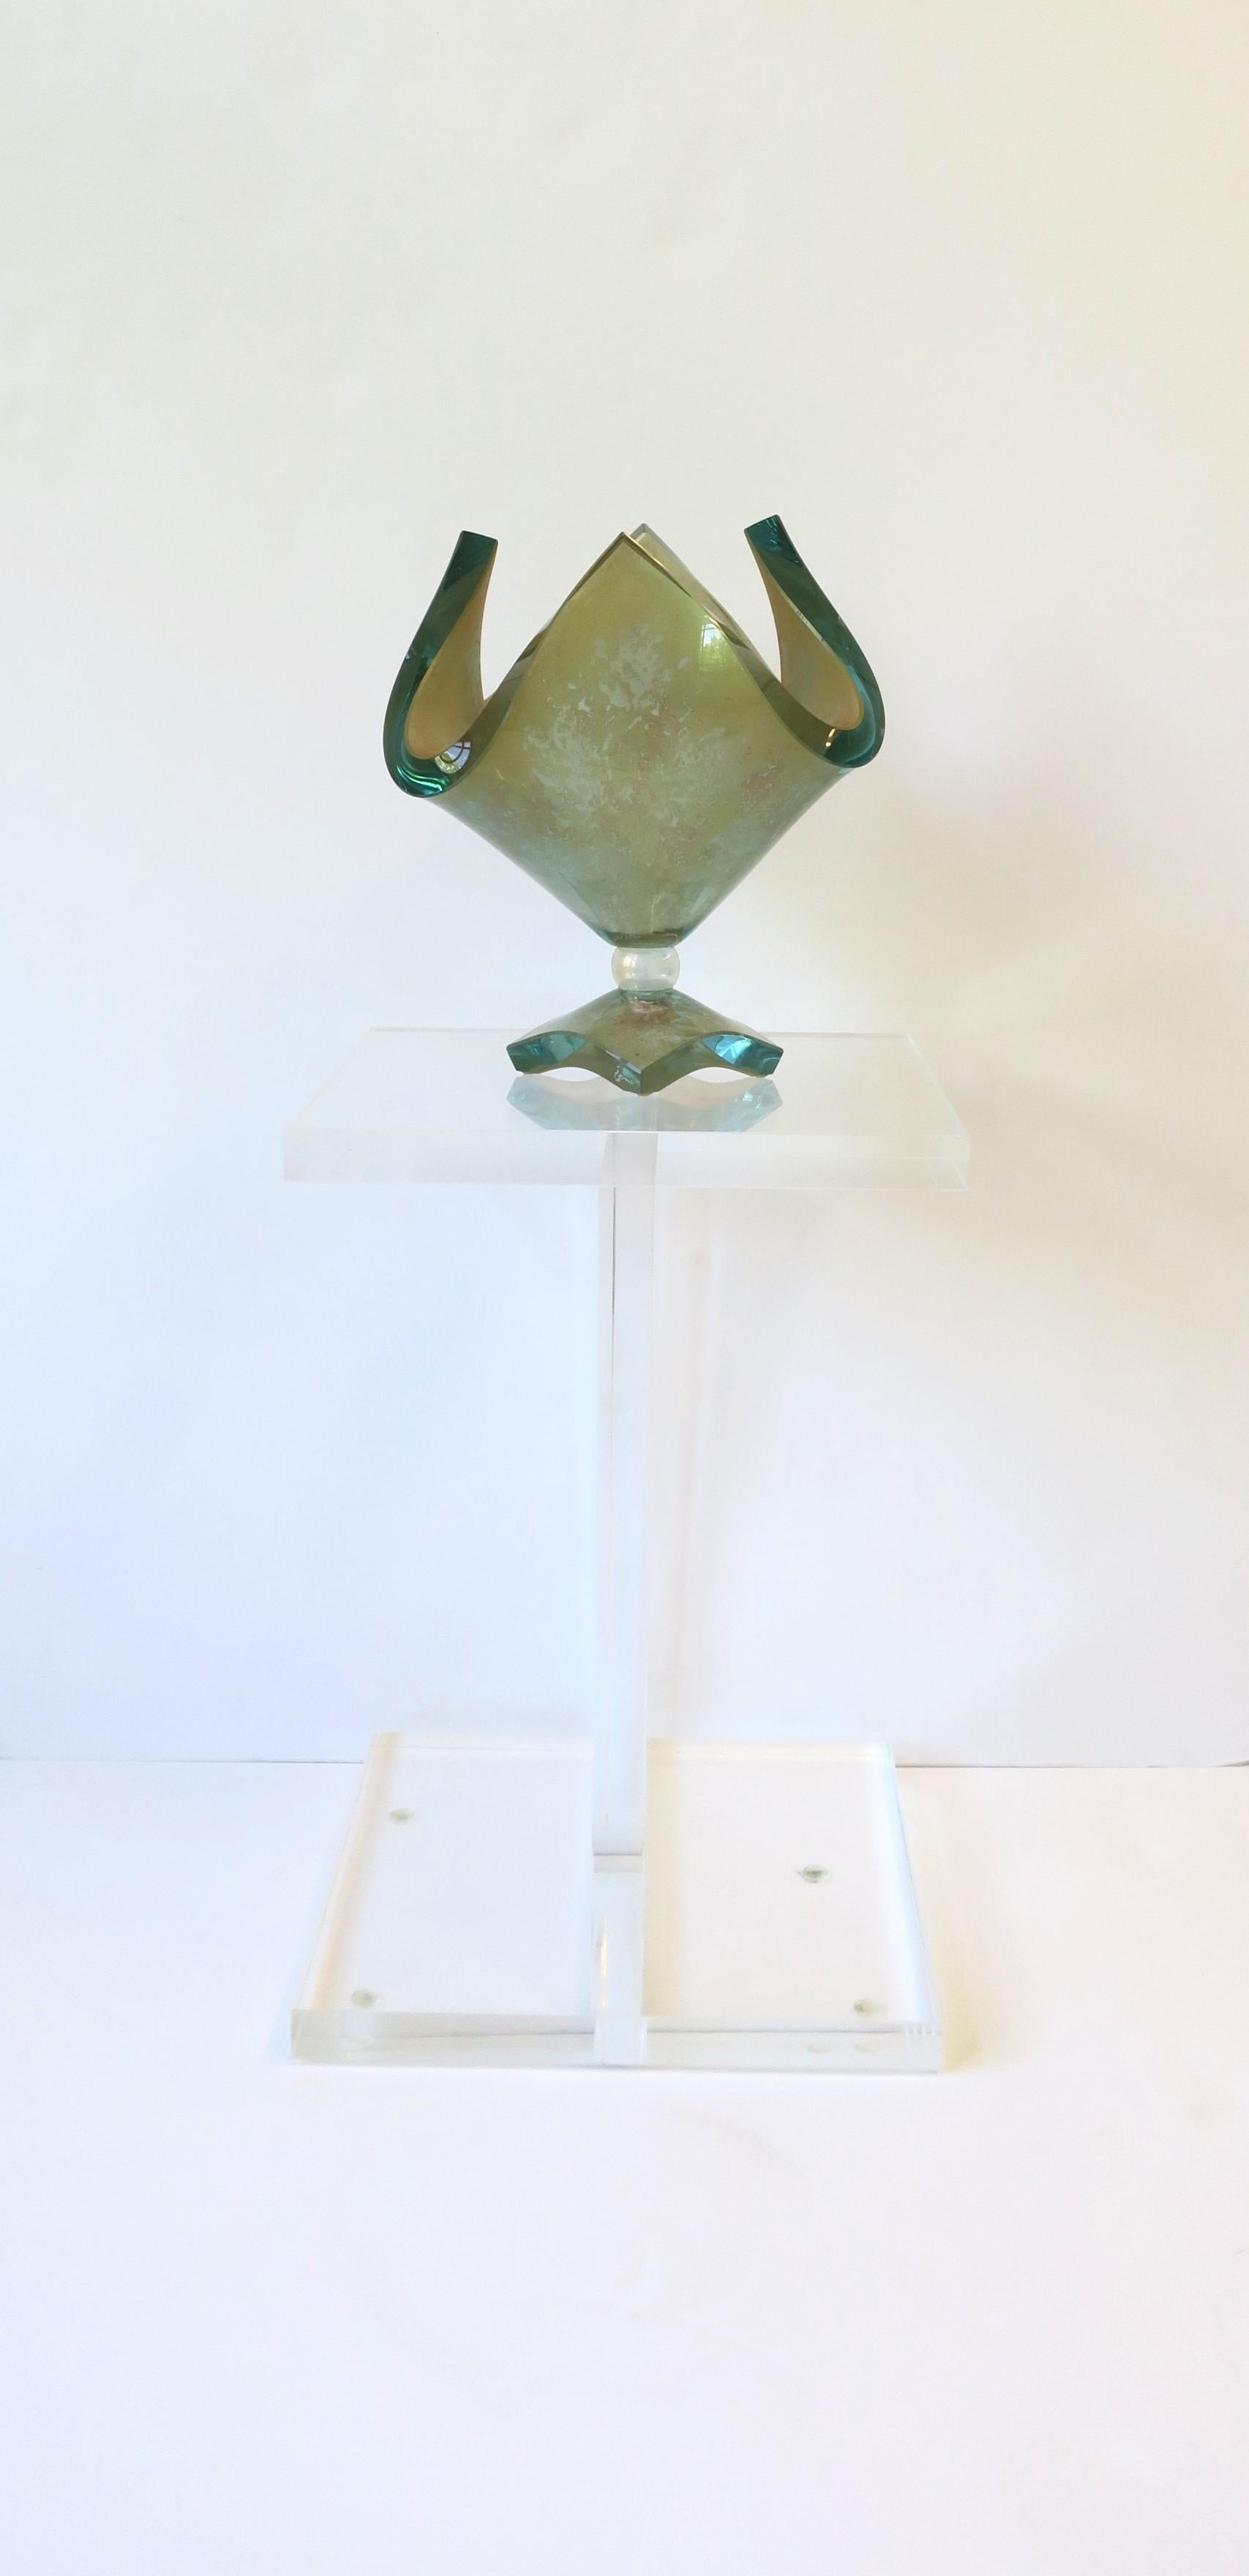 Hand-Crafted Italian Modern Glass Handkerchief Vessel Vase Compote Sculpture, 20th Century For Sale